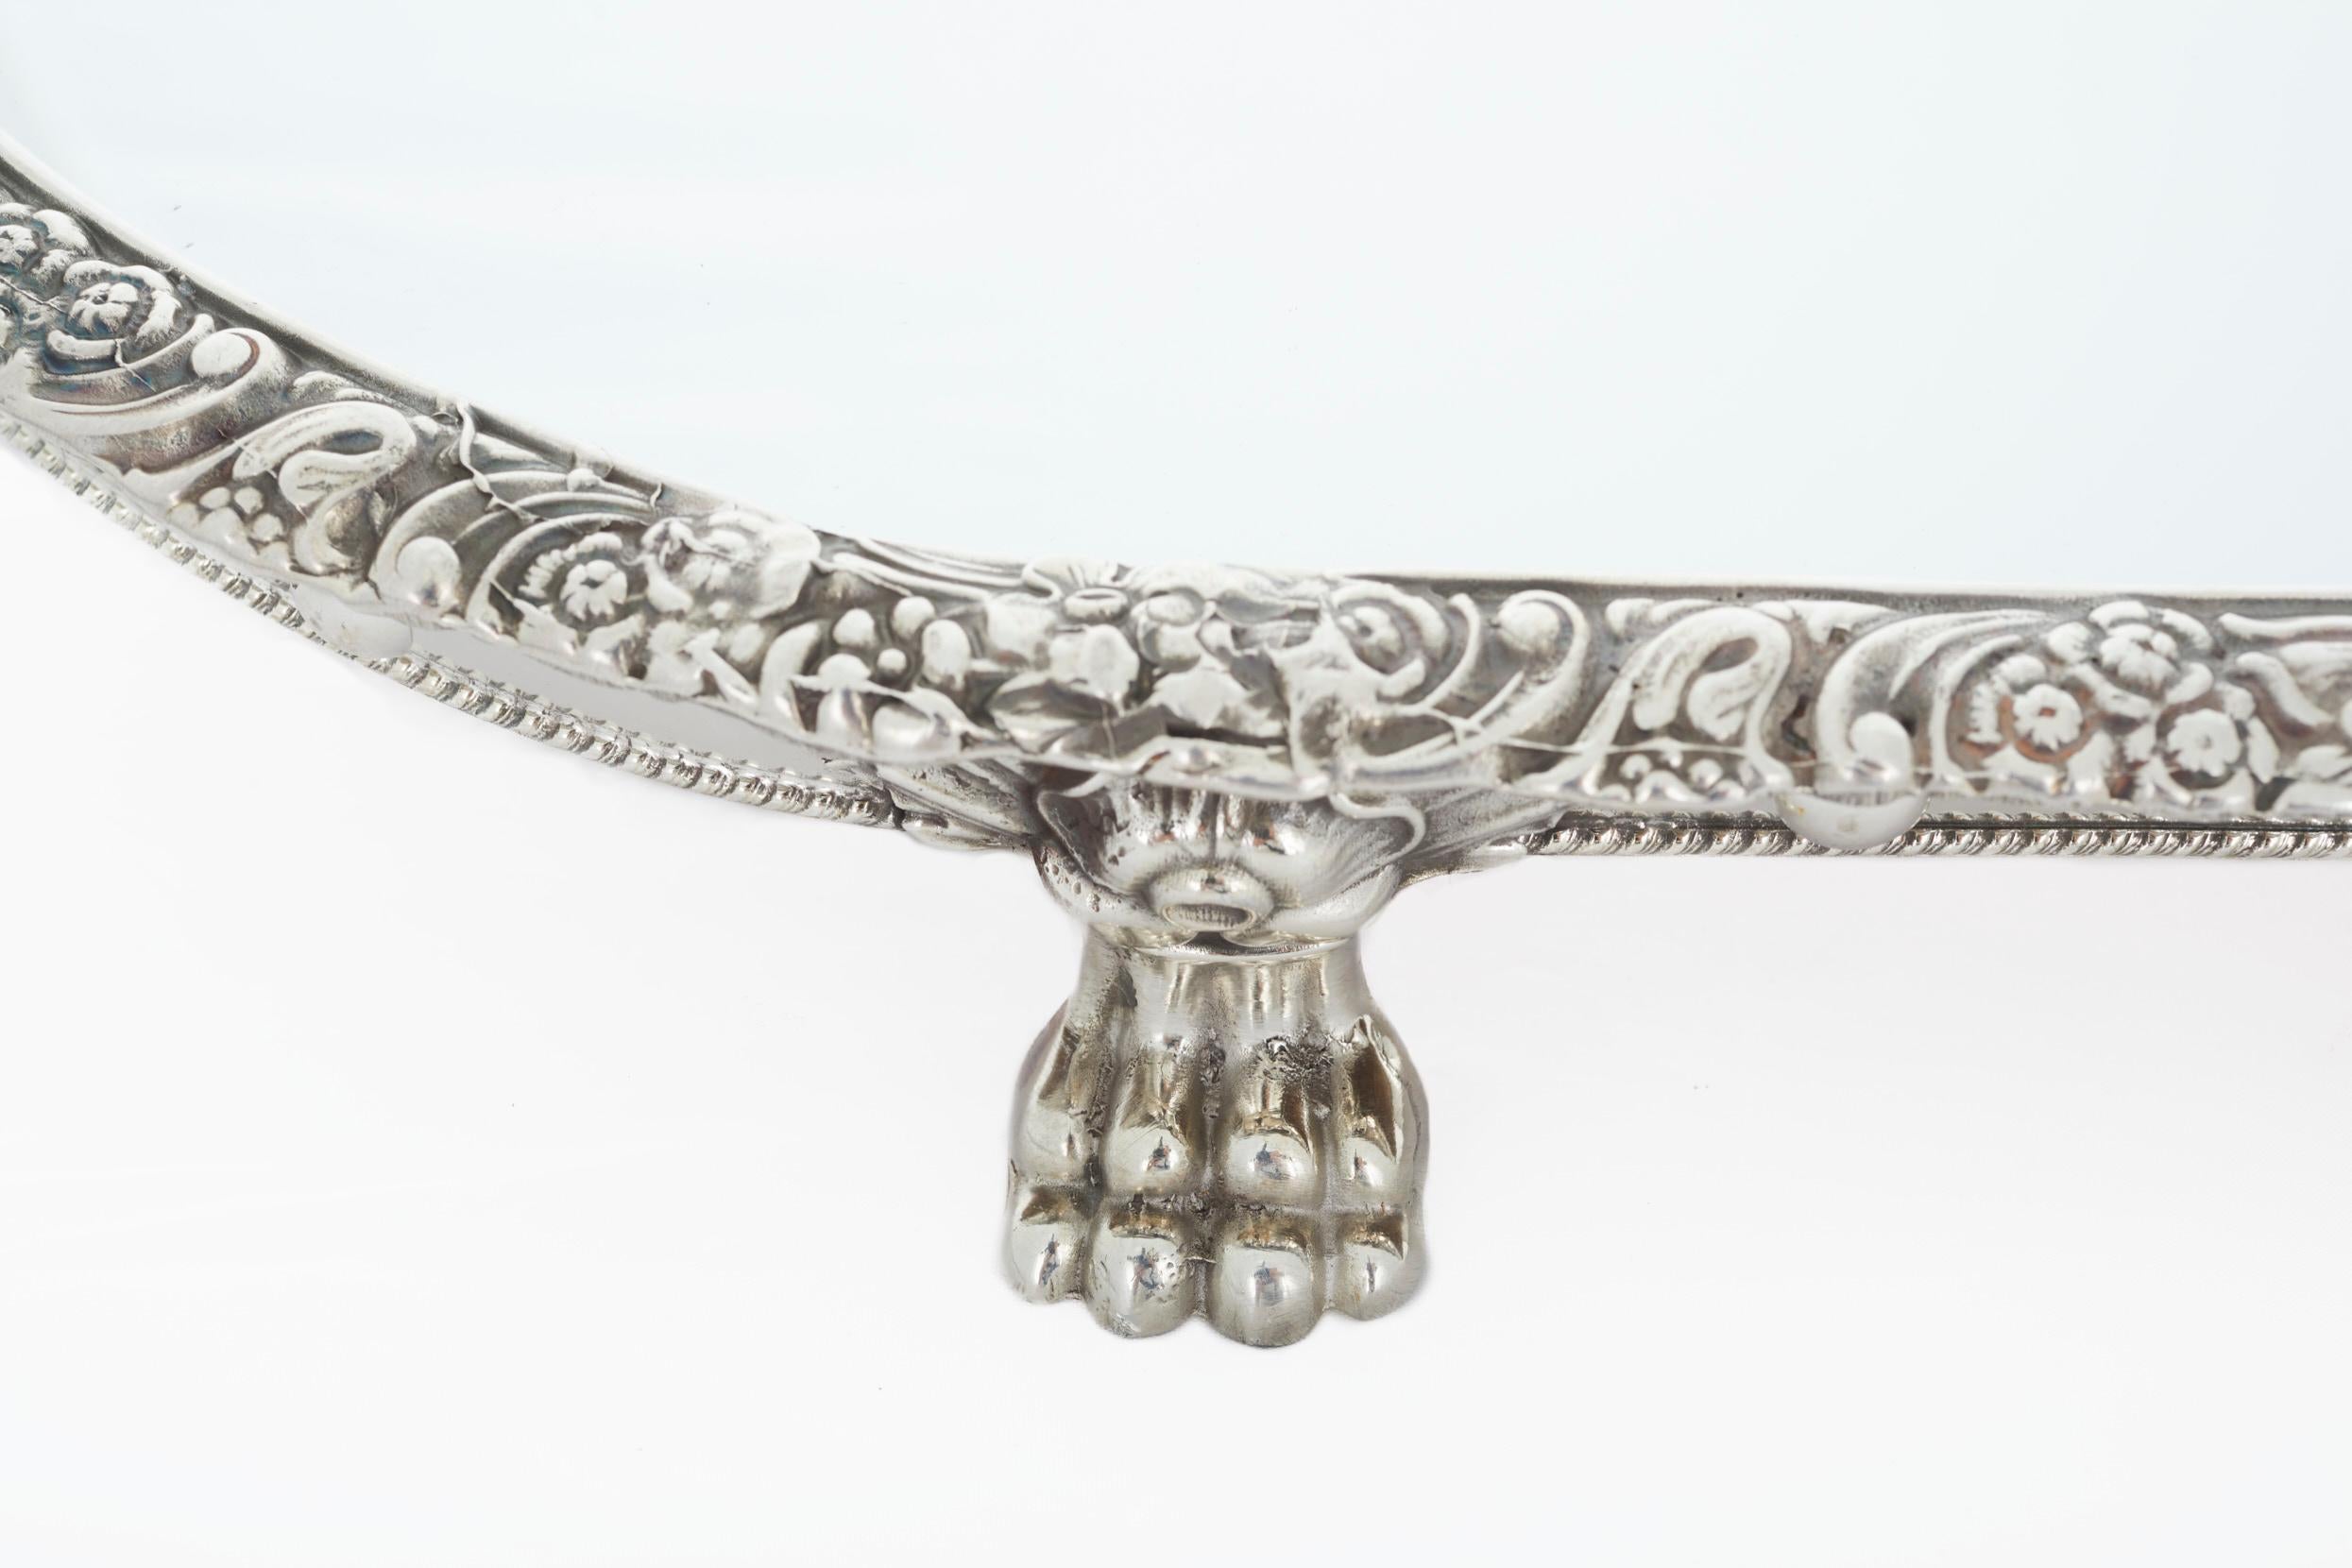 Early 20th century English silver plate frame surtout de table mirrored plateau. The plateau features a silver plate framed with exterior floral boarding details and wood underneath. The plateau is in great condition. Minor wear consistent with age